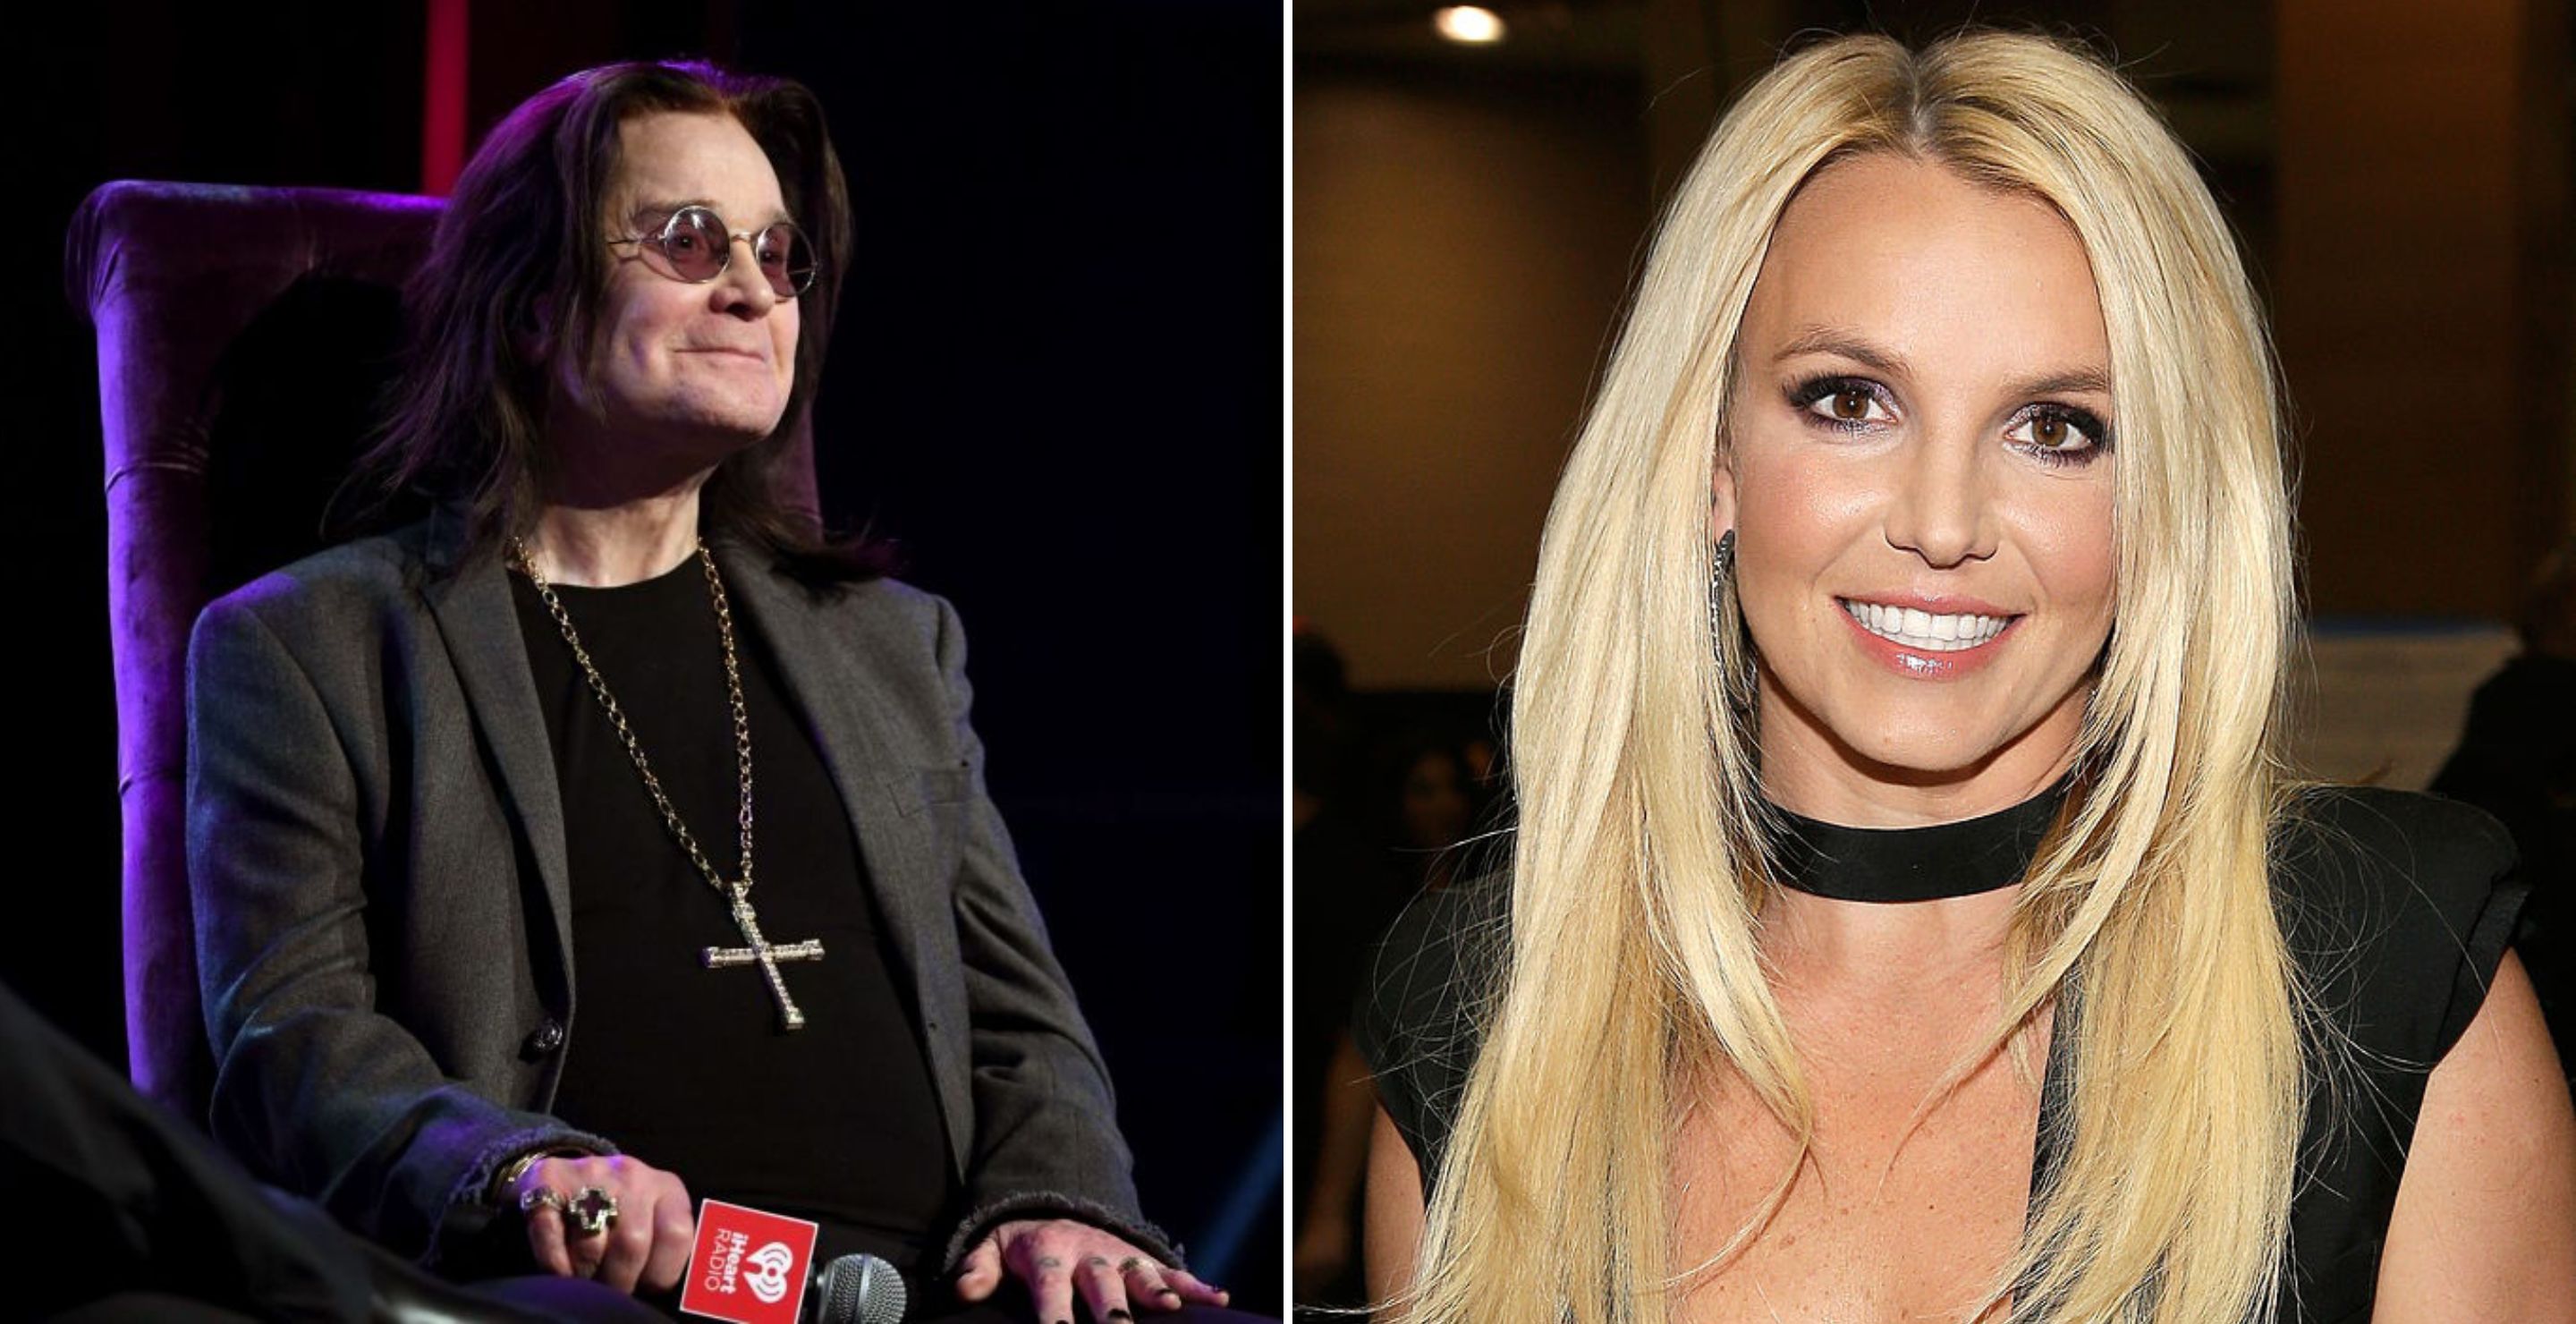 Ozzy Osbourne Is Fed Up With Britney Spears' Dance Videos